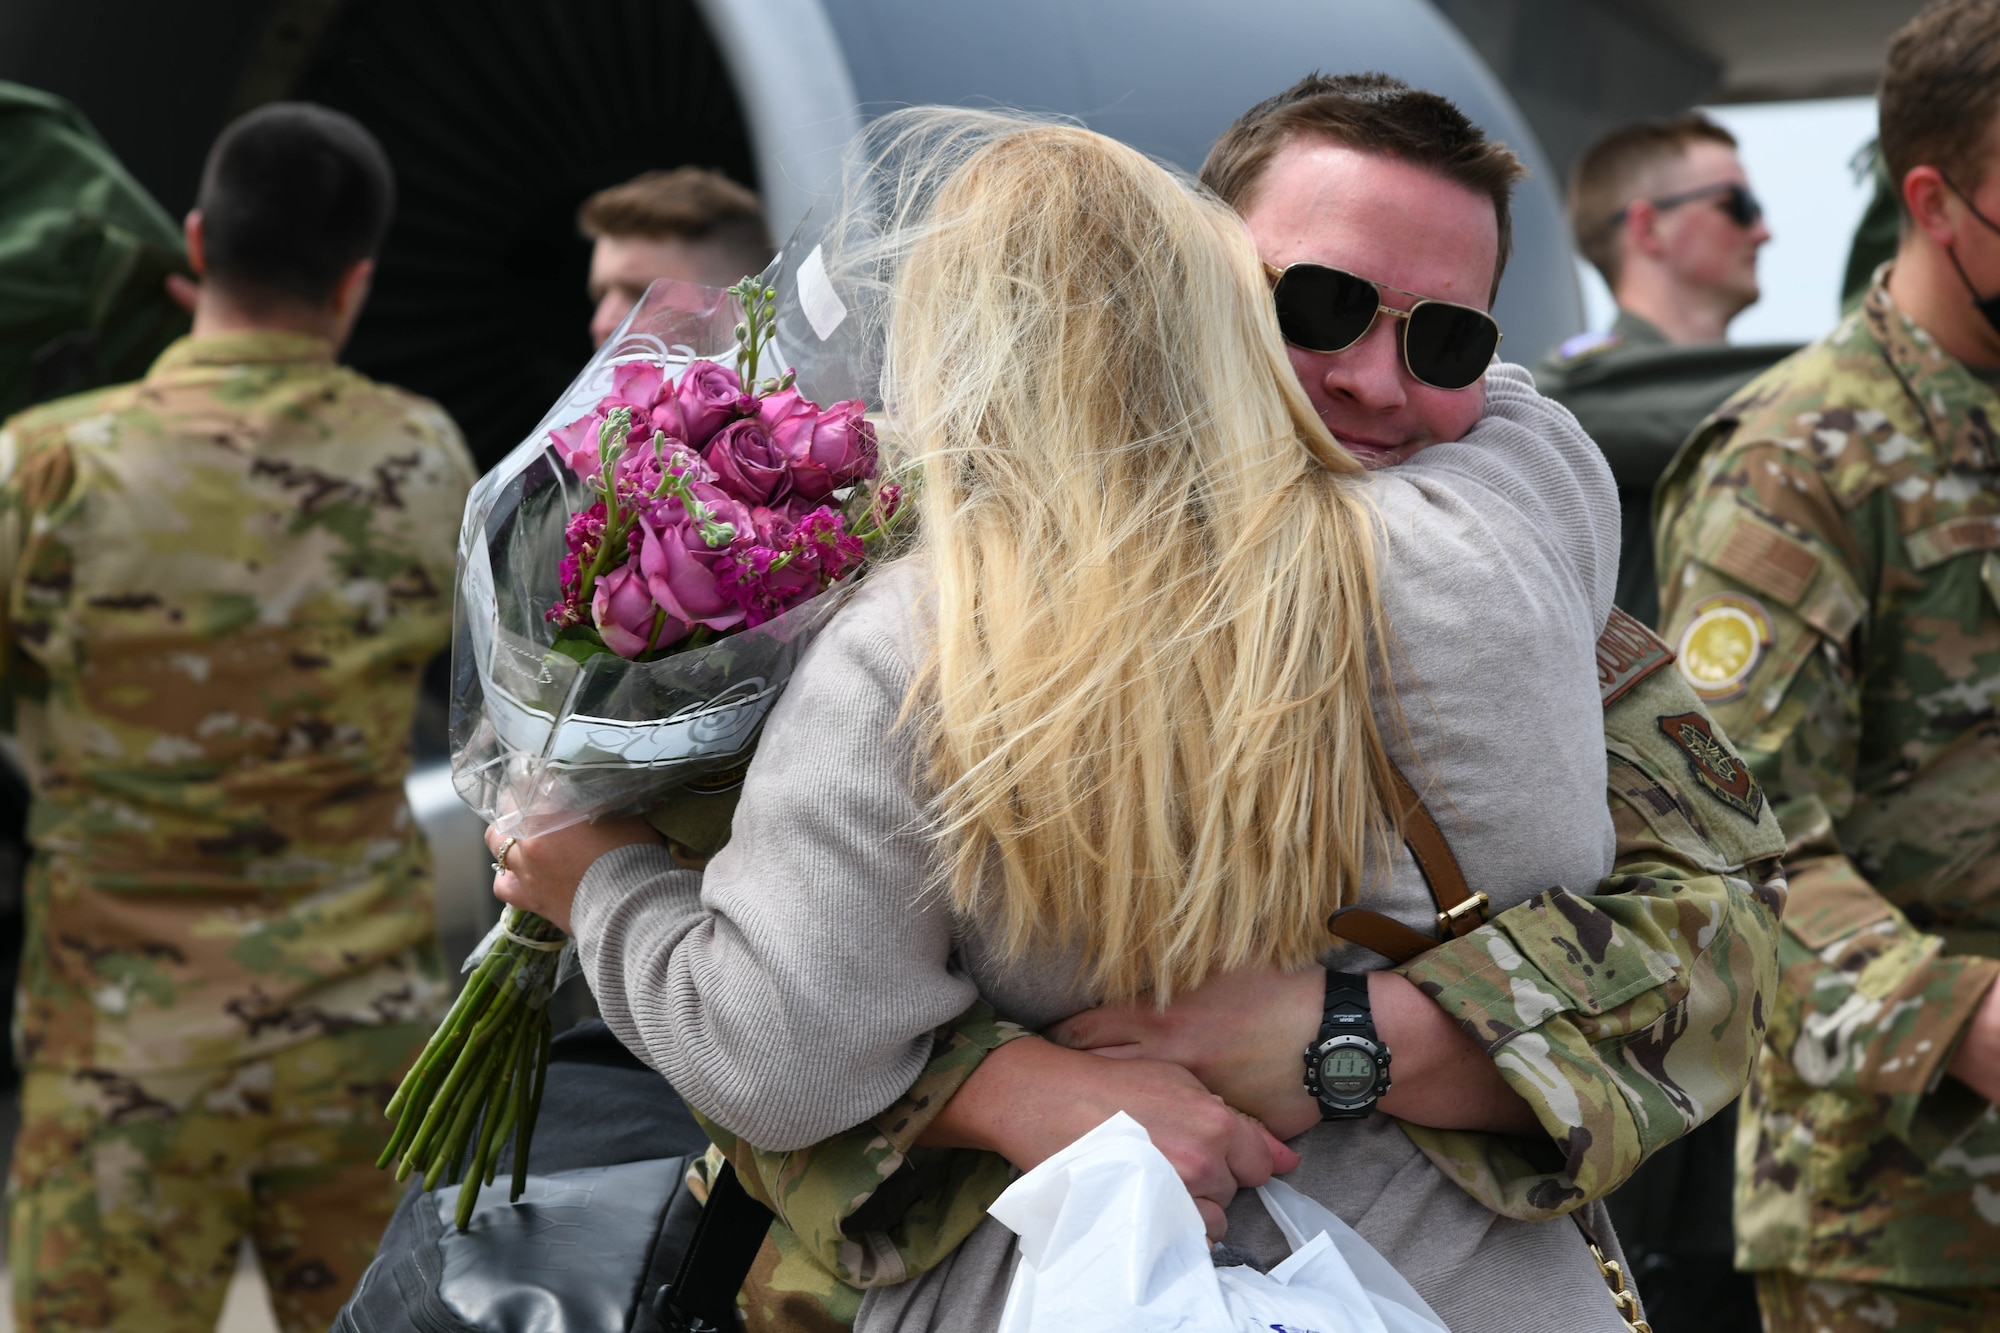 Capt. Micah Newmann, 350th Air Refueling Squadron pilot, hugs his wife Marie Newmann after returning home from deployment April 13, 2021, at McConnell Air Force Base, Kansas. After a demanding yet successful deployment, the Falcons were happy to return home to Team McConnell and their loved ones. (U.S. Air Force photo by Senior Airman Nilsa Garcia)